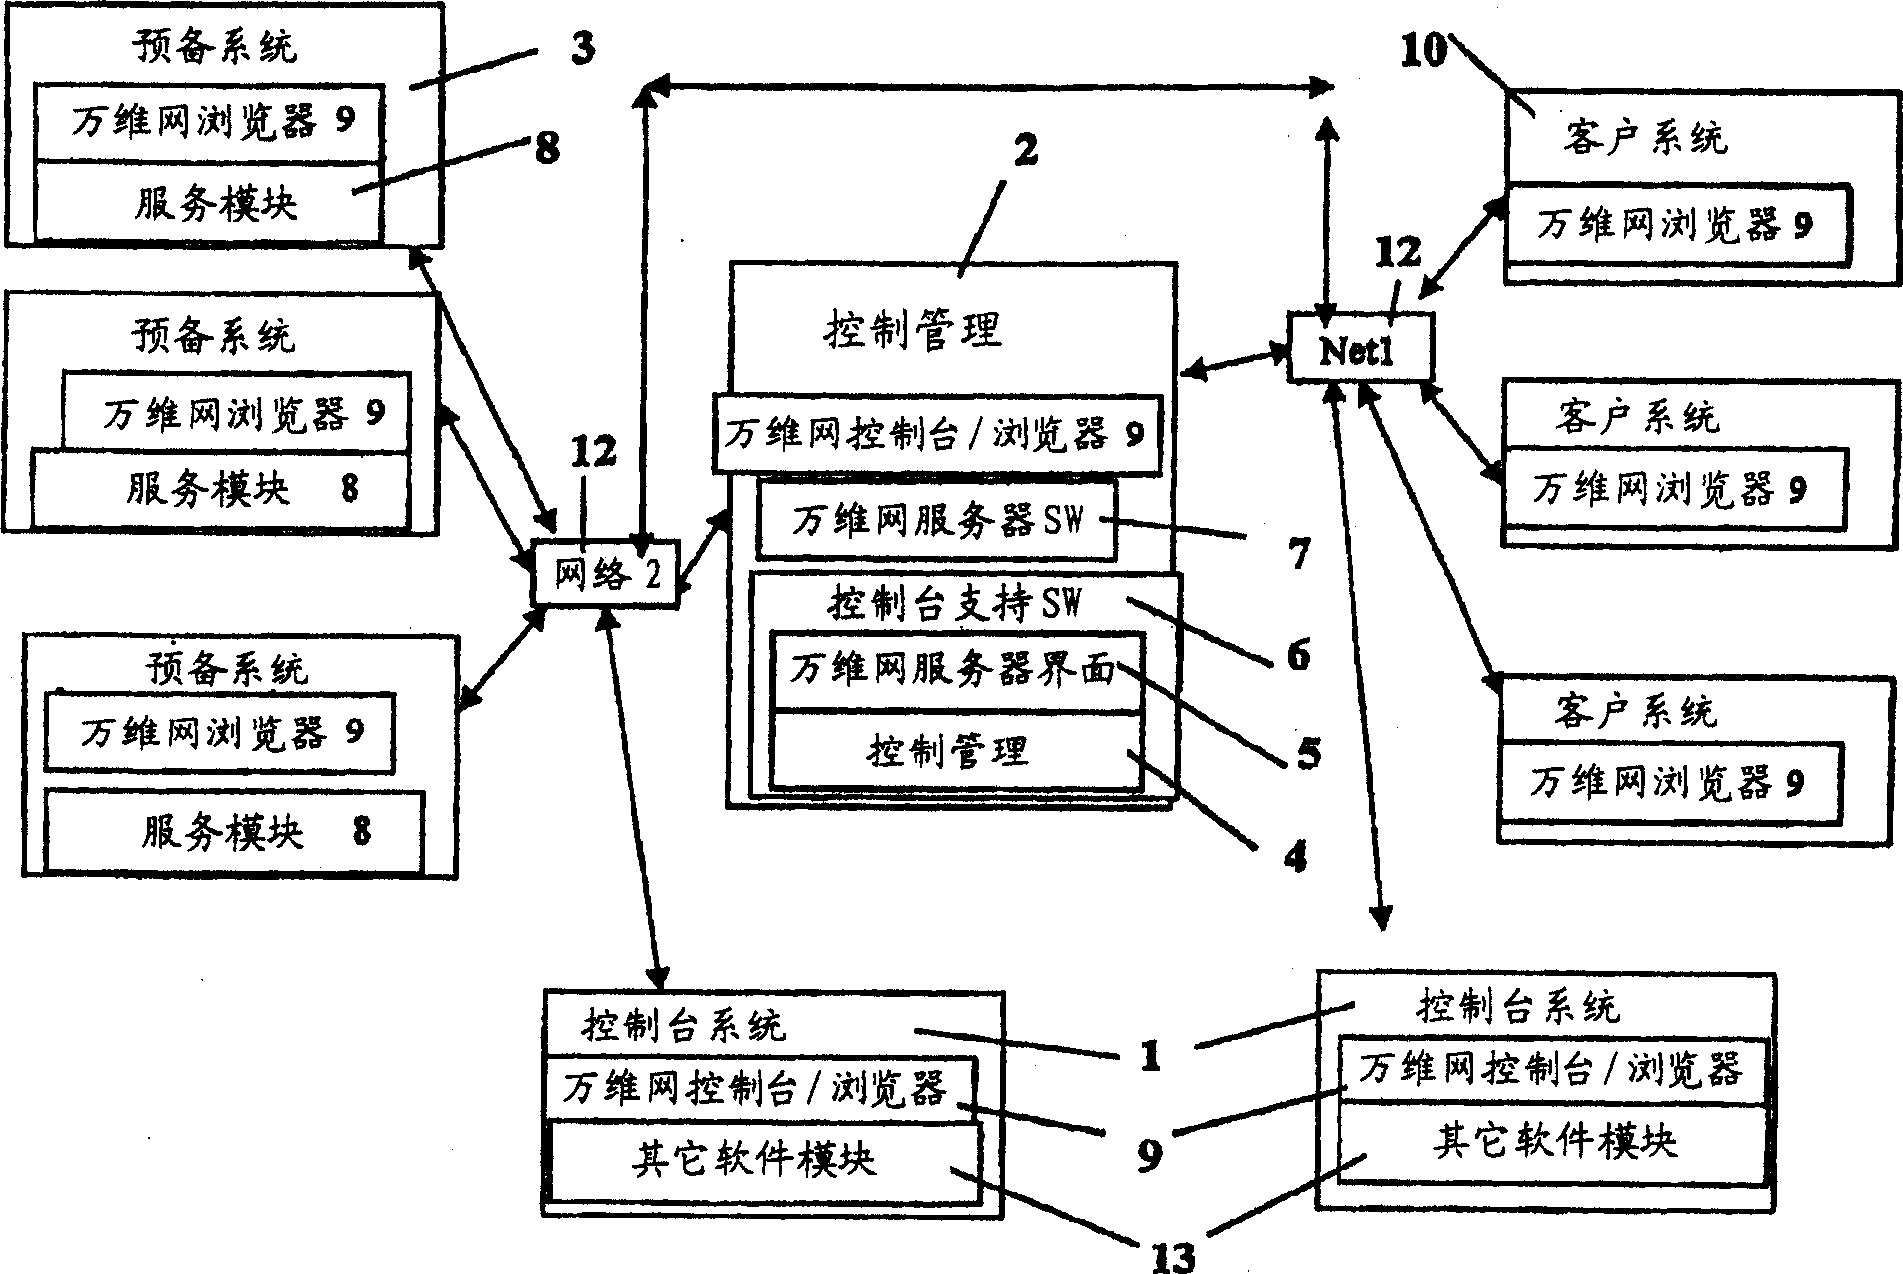 Method and apparatus for information exchange over a web based environment